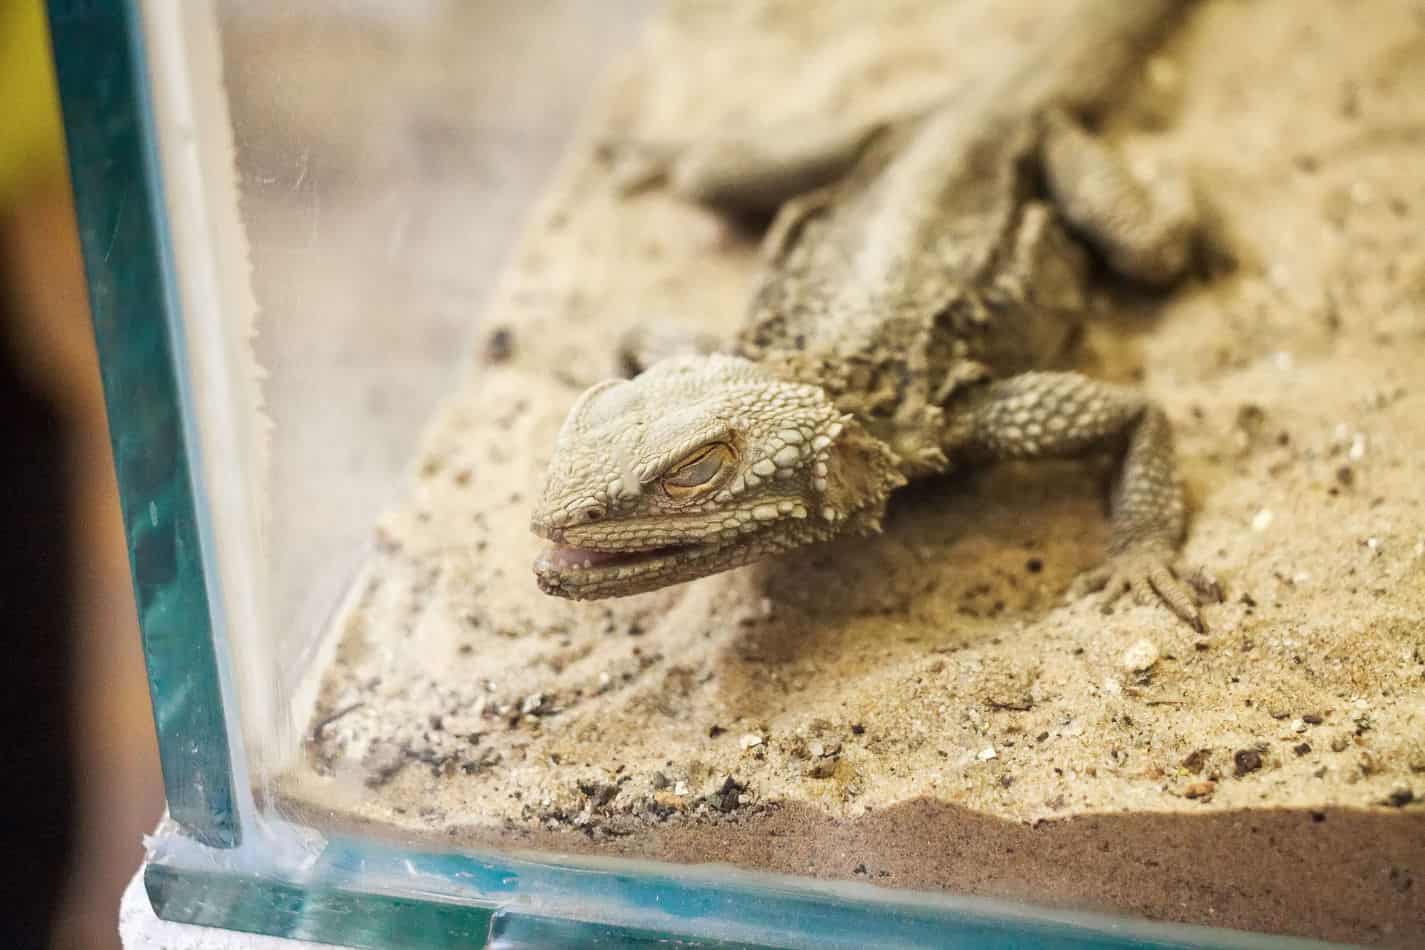 Bearded Dragons as Pets: Dangers, Cost to Buy One, and Ease of Care